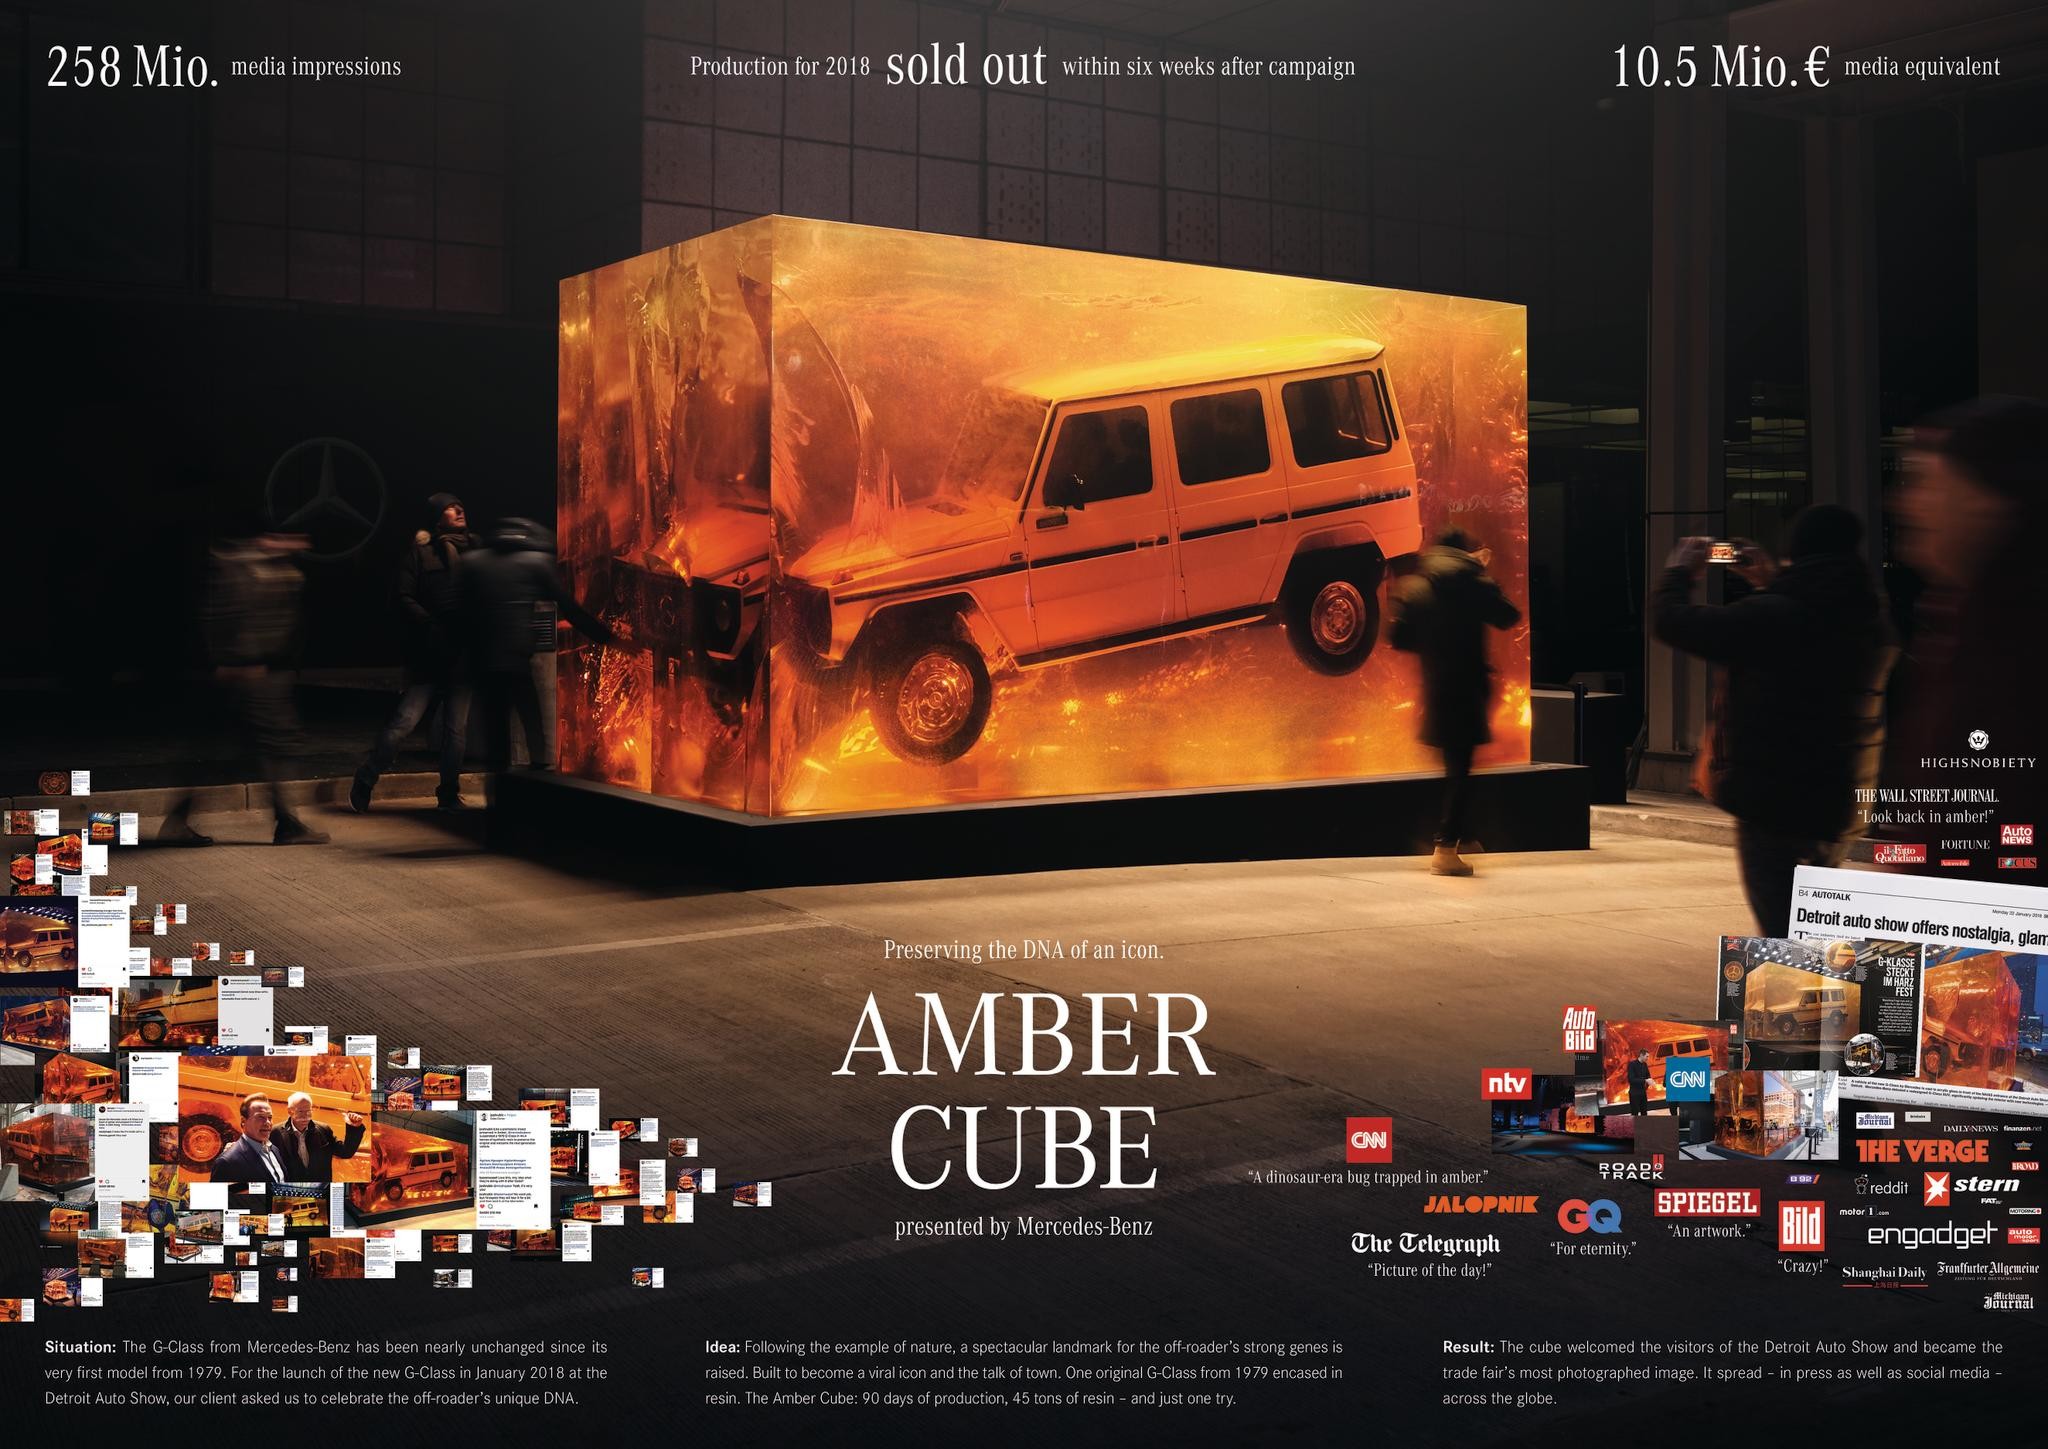 The Amber Cube